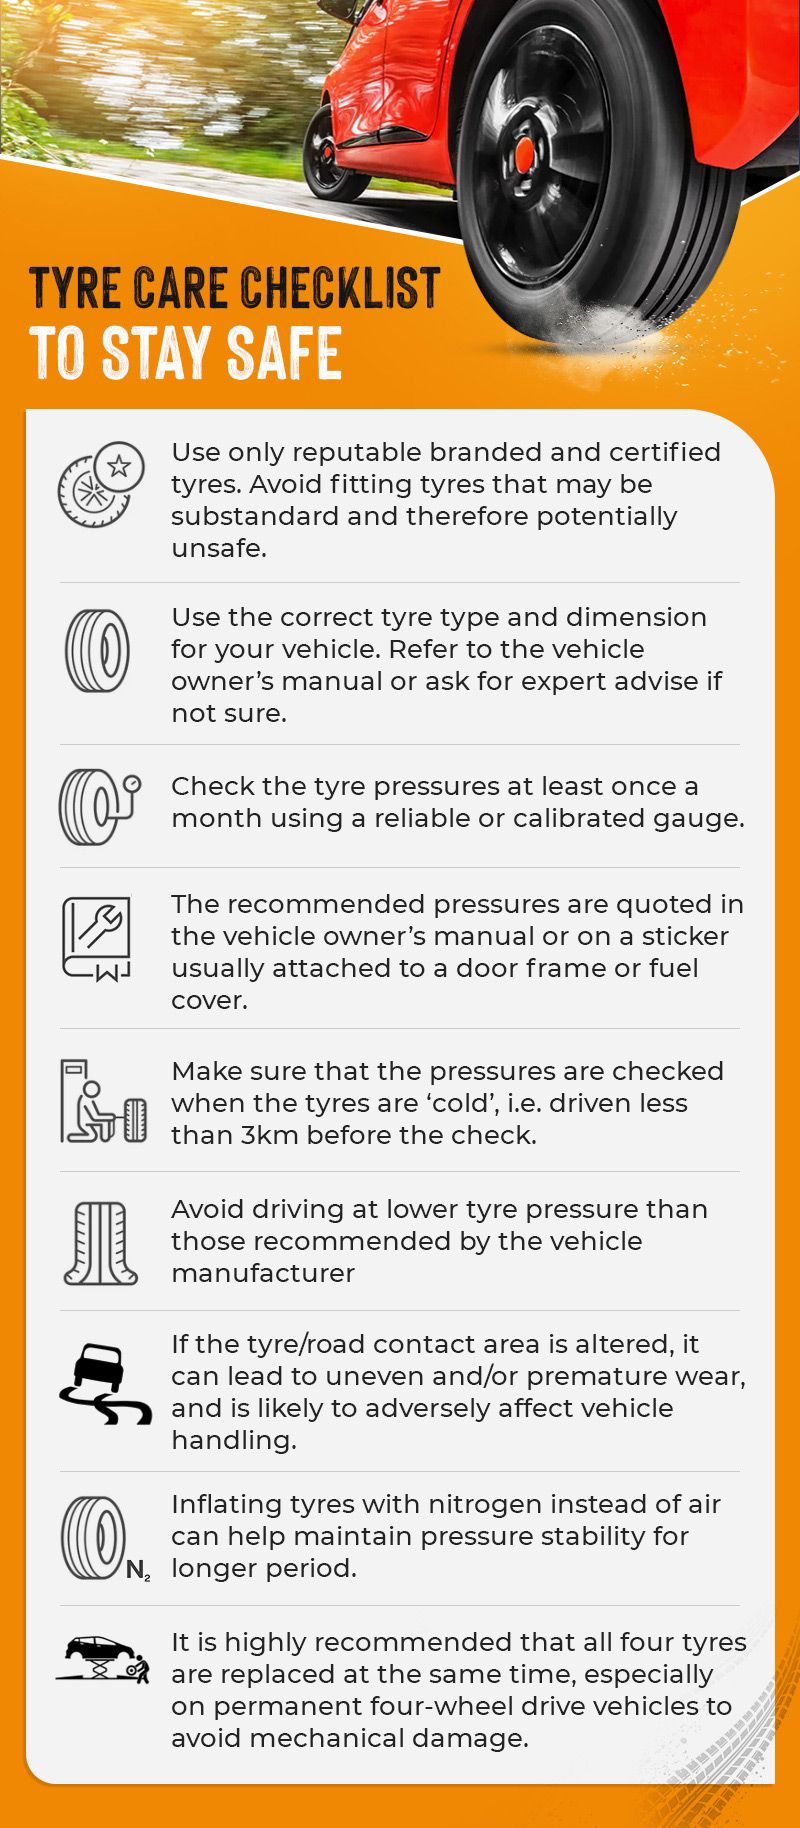 Tyre safety